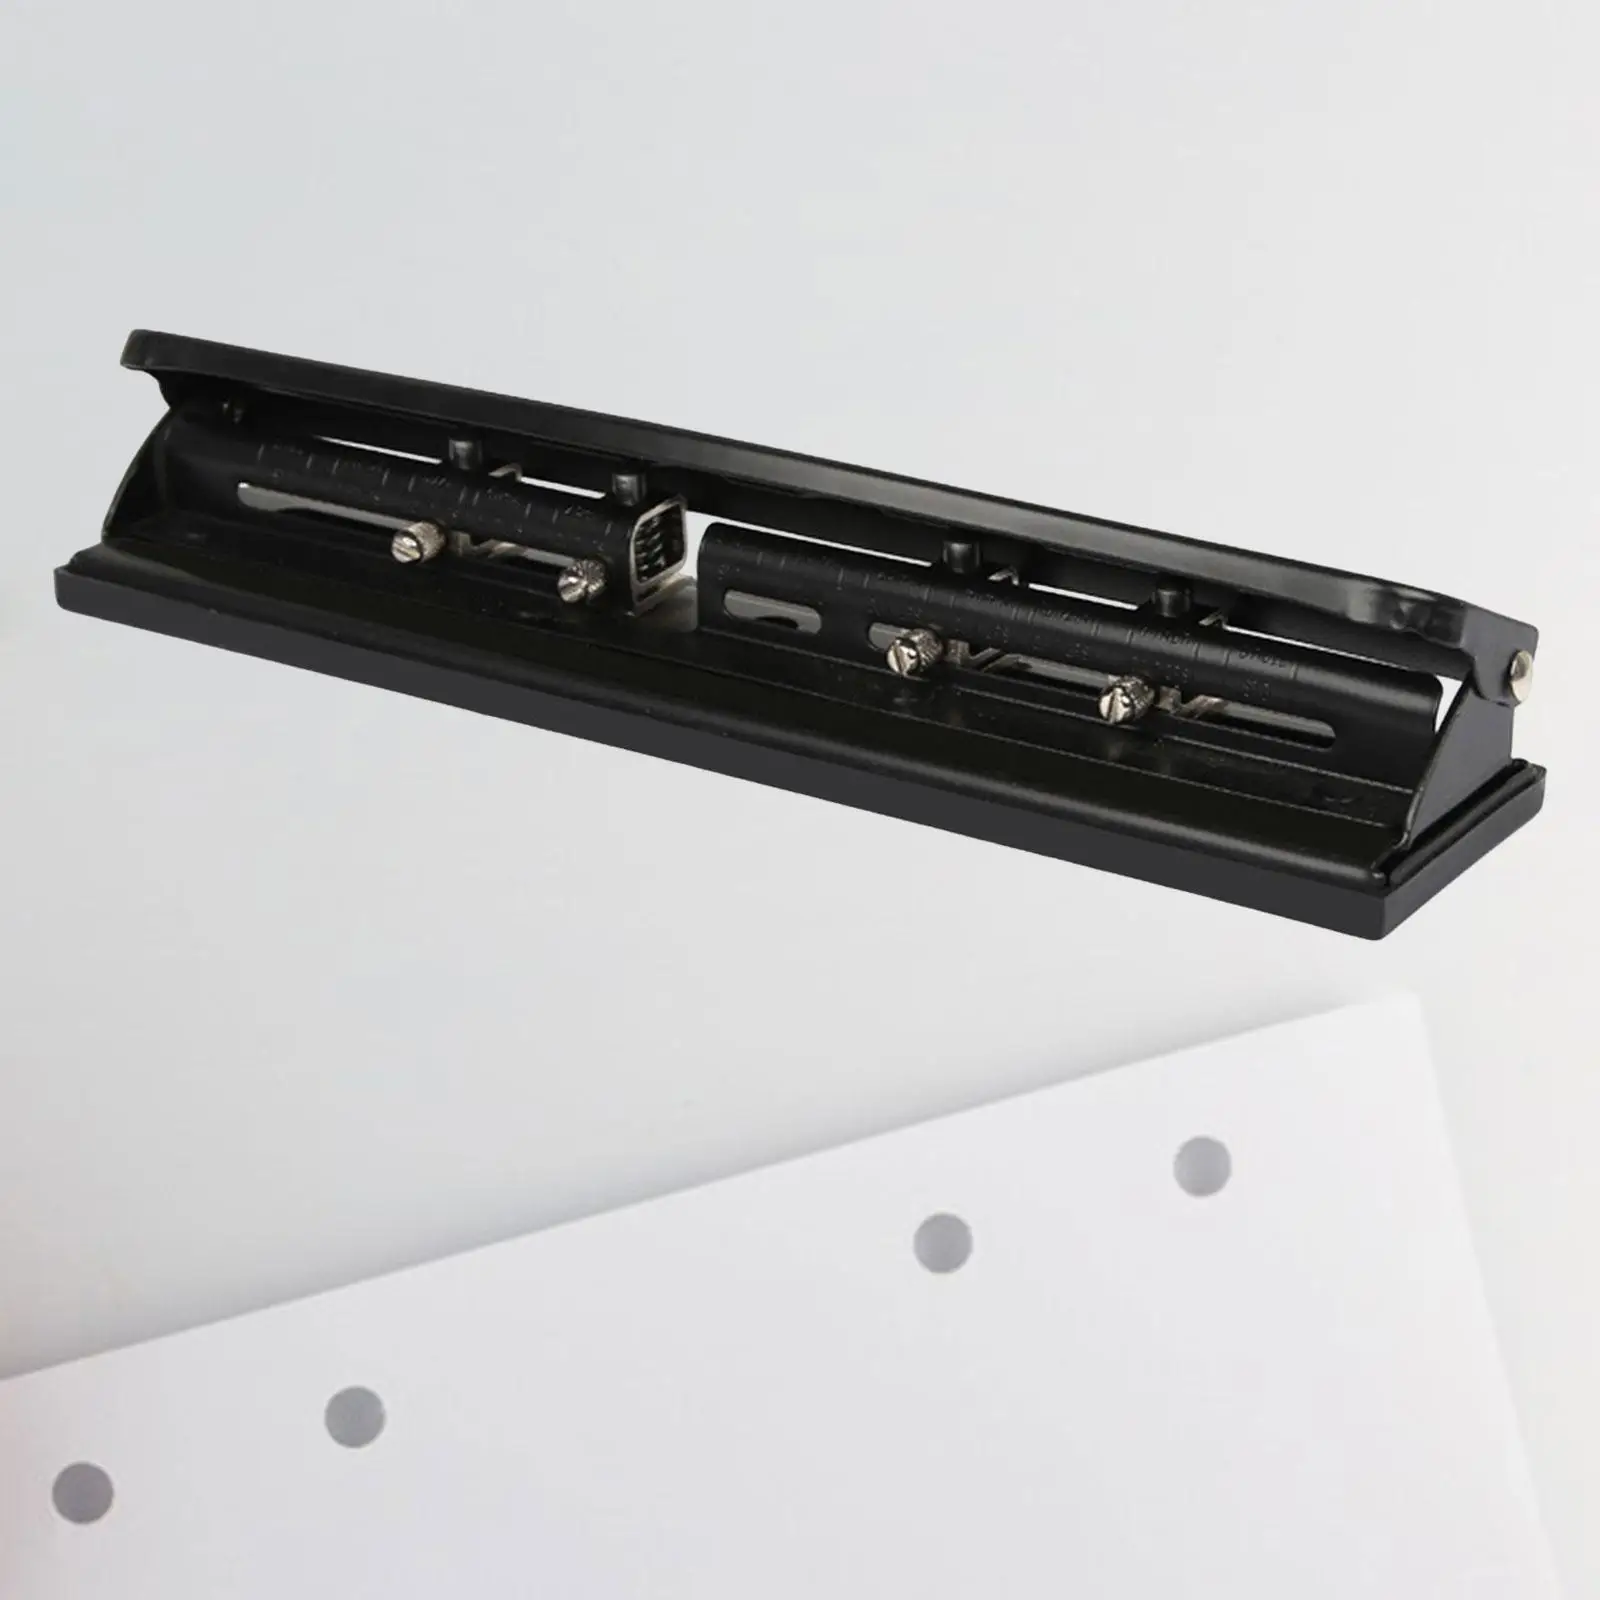 4 Hole Punch Manual Precision Metal Desktop 10 Sheet Capacity Adjustable Paper Puncher for Classroom Working Learning Craft